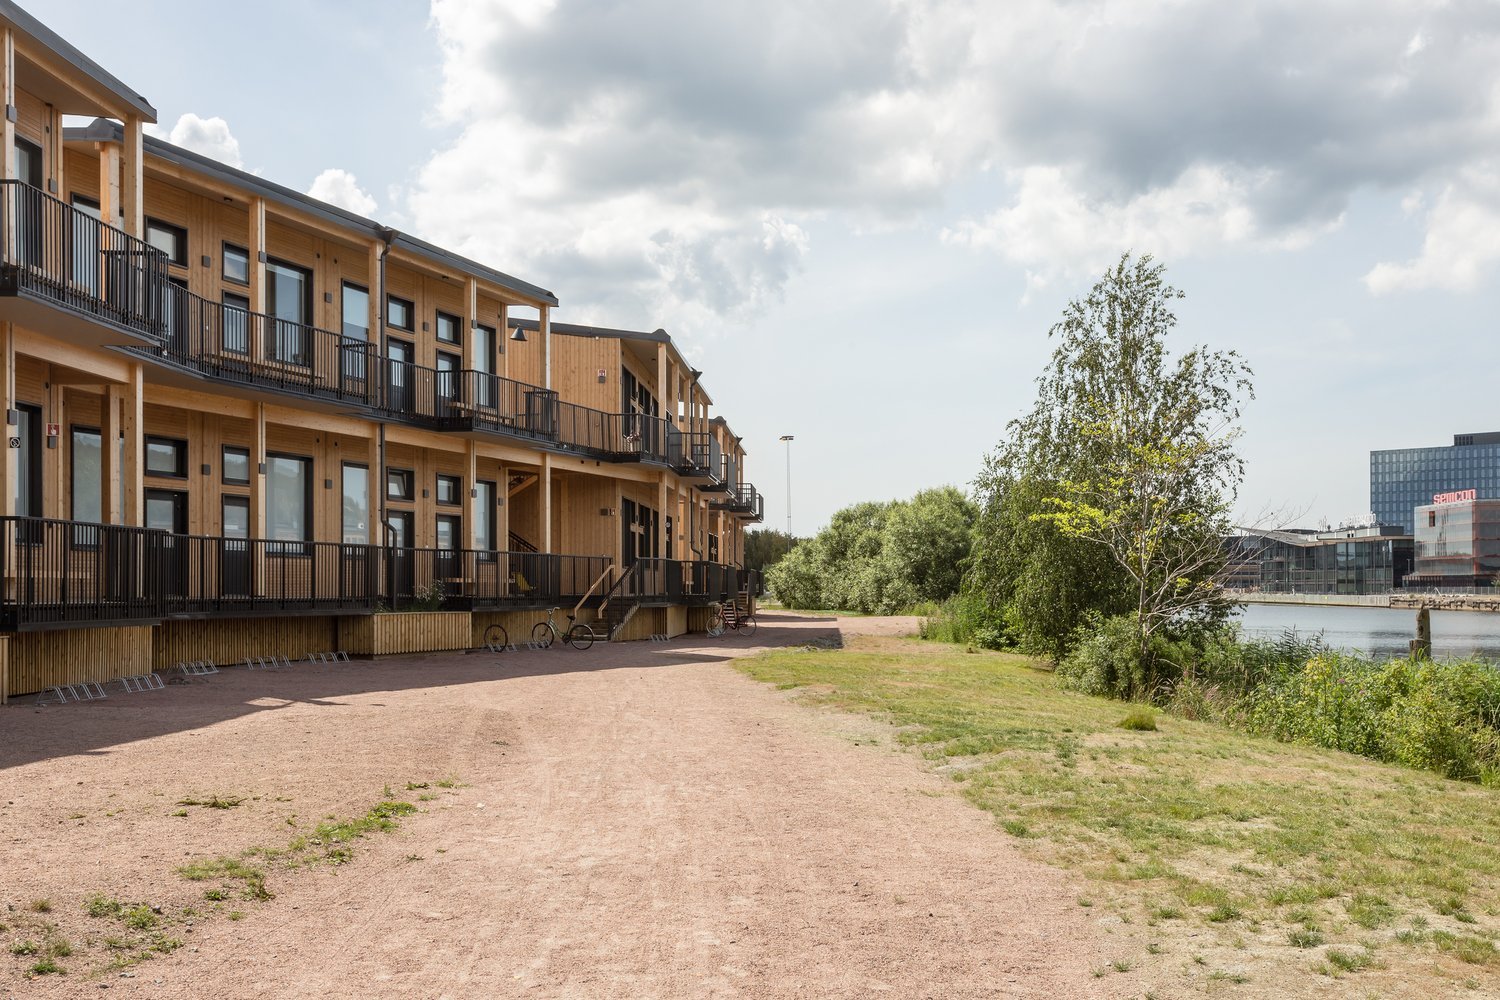 Exterior of accommodation near water in Gothenburg